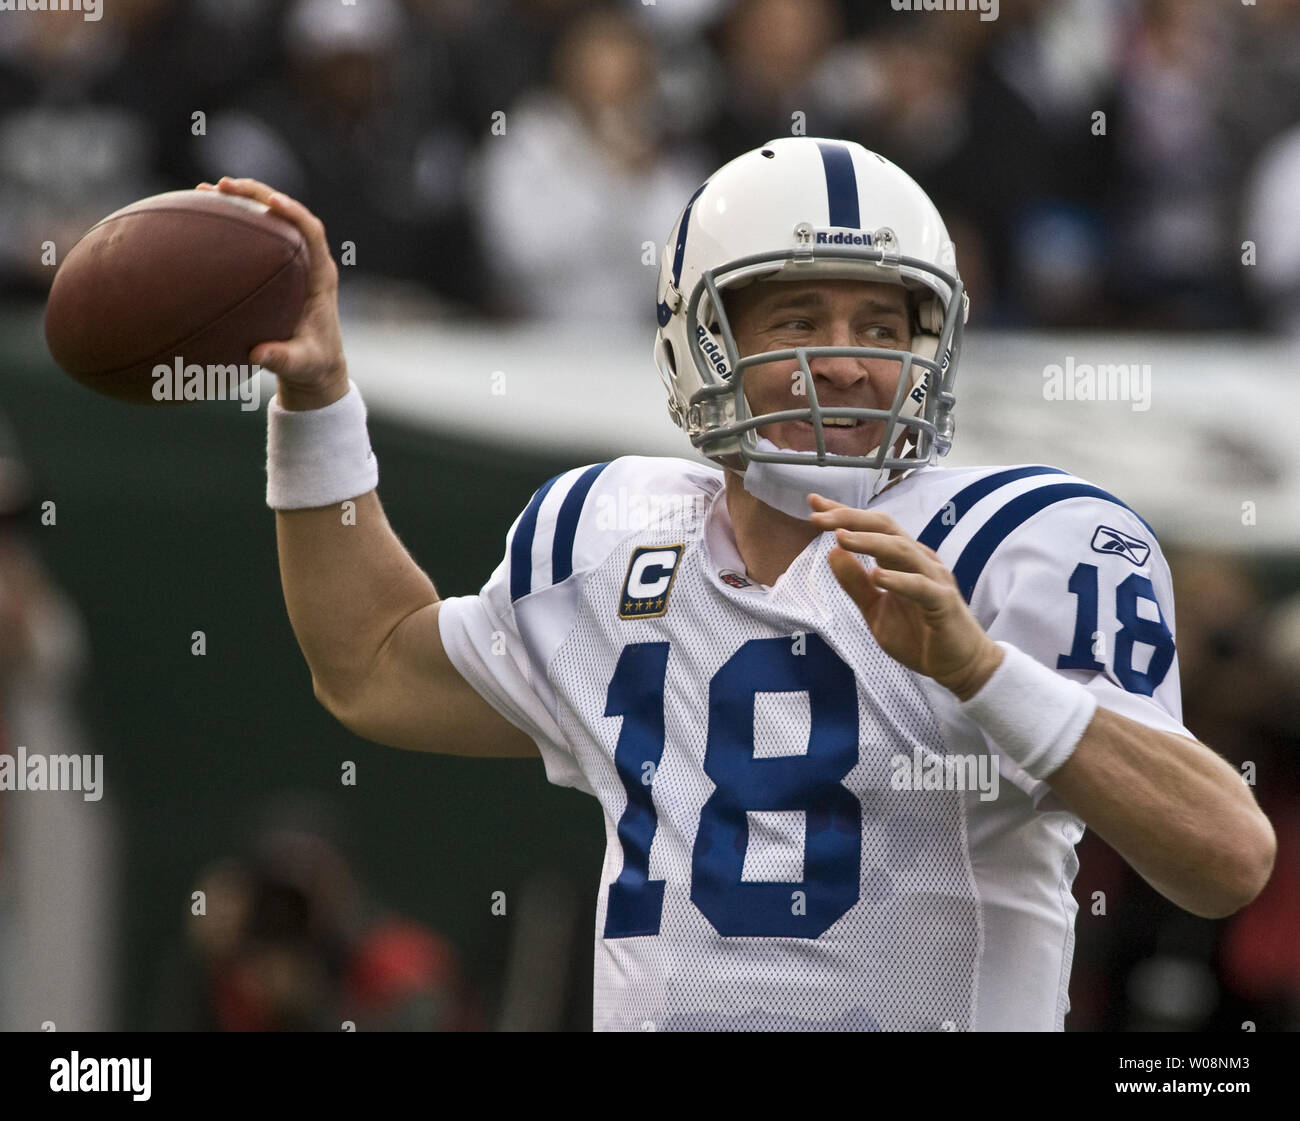 Indianapolis Colts Peyton Manning passes against the  Oakland Raiders at the Oakland Coliseum in Oakland, California on December 26, 2010.  The Colts defeated the Raiders 31-26.     UPI/Terry Schmitt Stock Photo